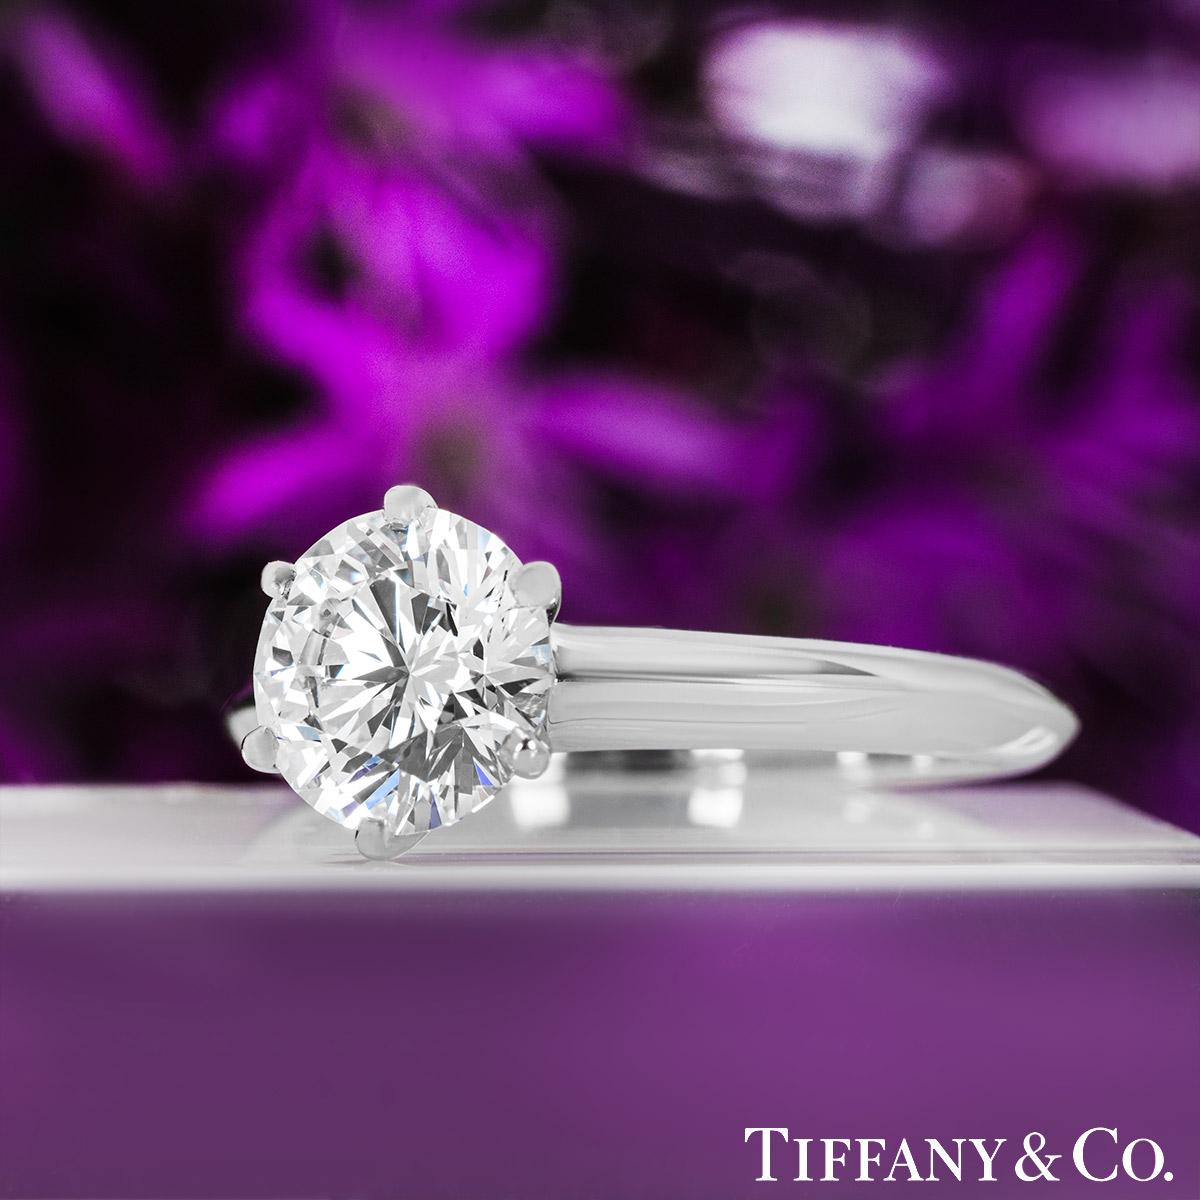 Tiffany & Co. Round Diamond Engagement Ring 1.53 Carat For Sale 2